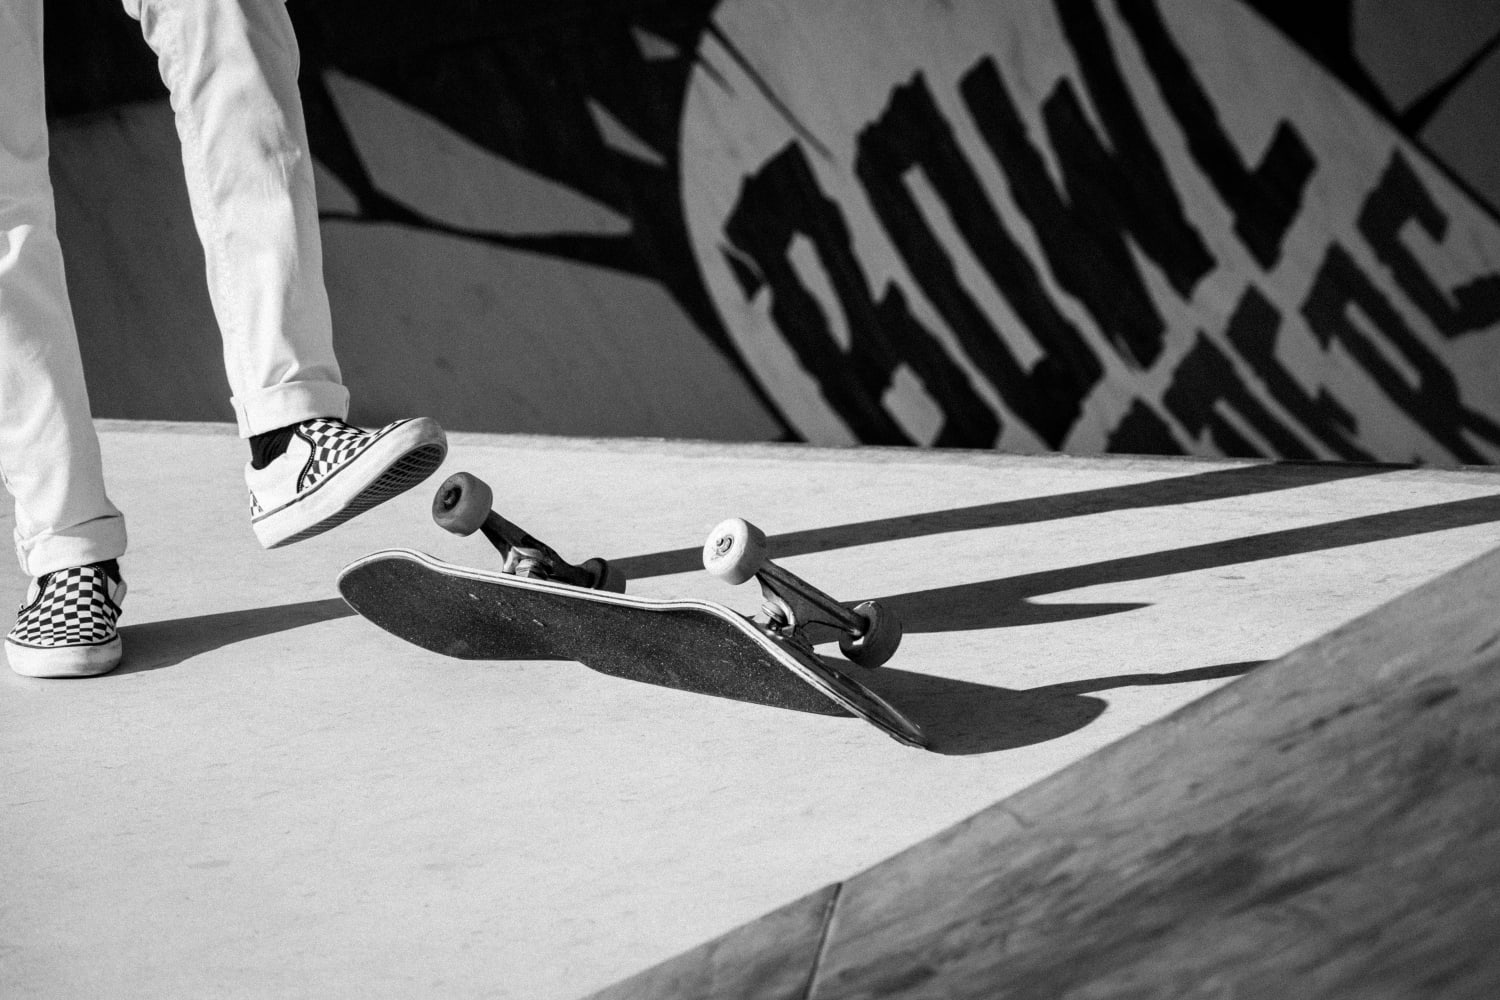 The most famous skateboard brands in the world